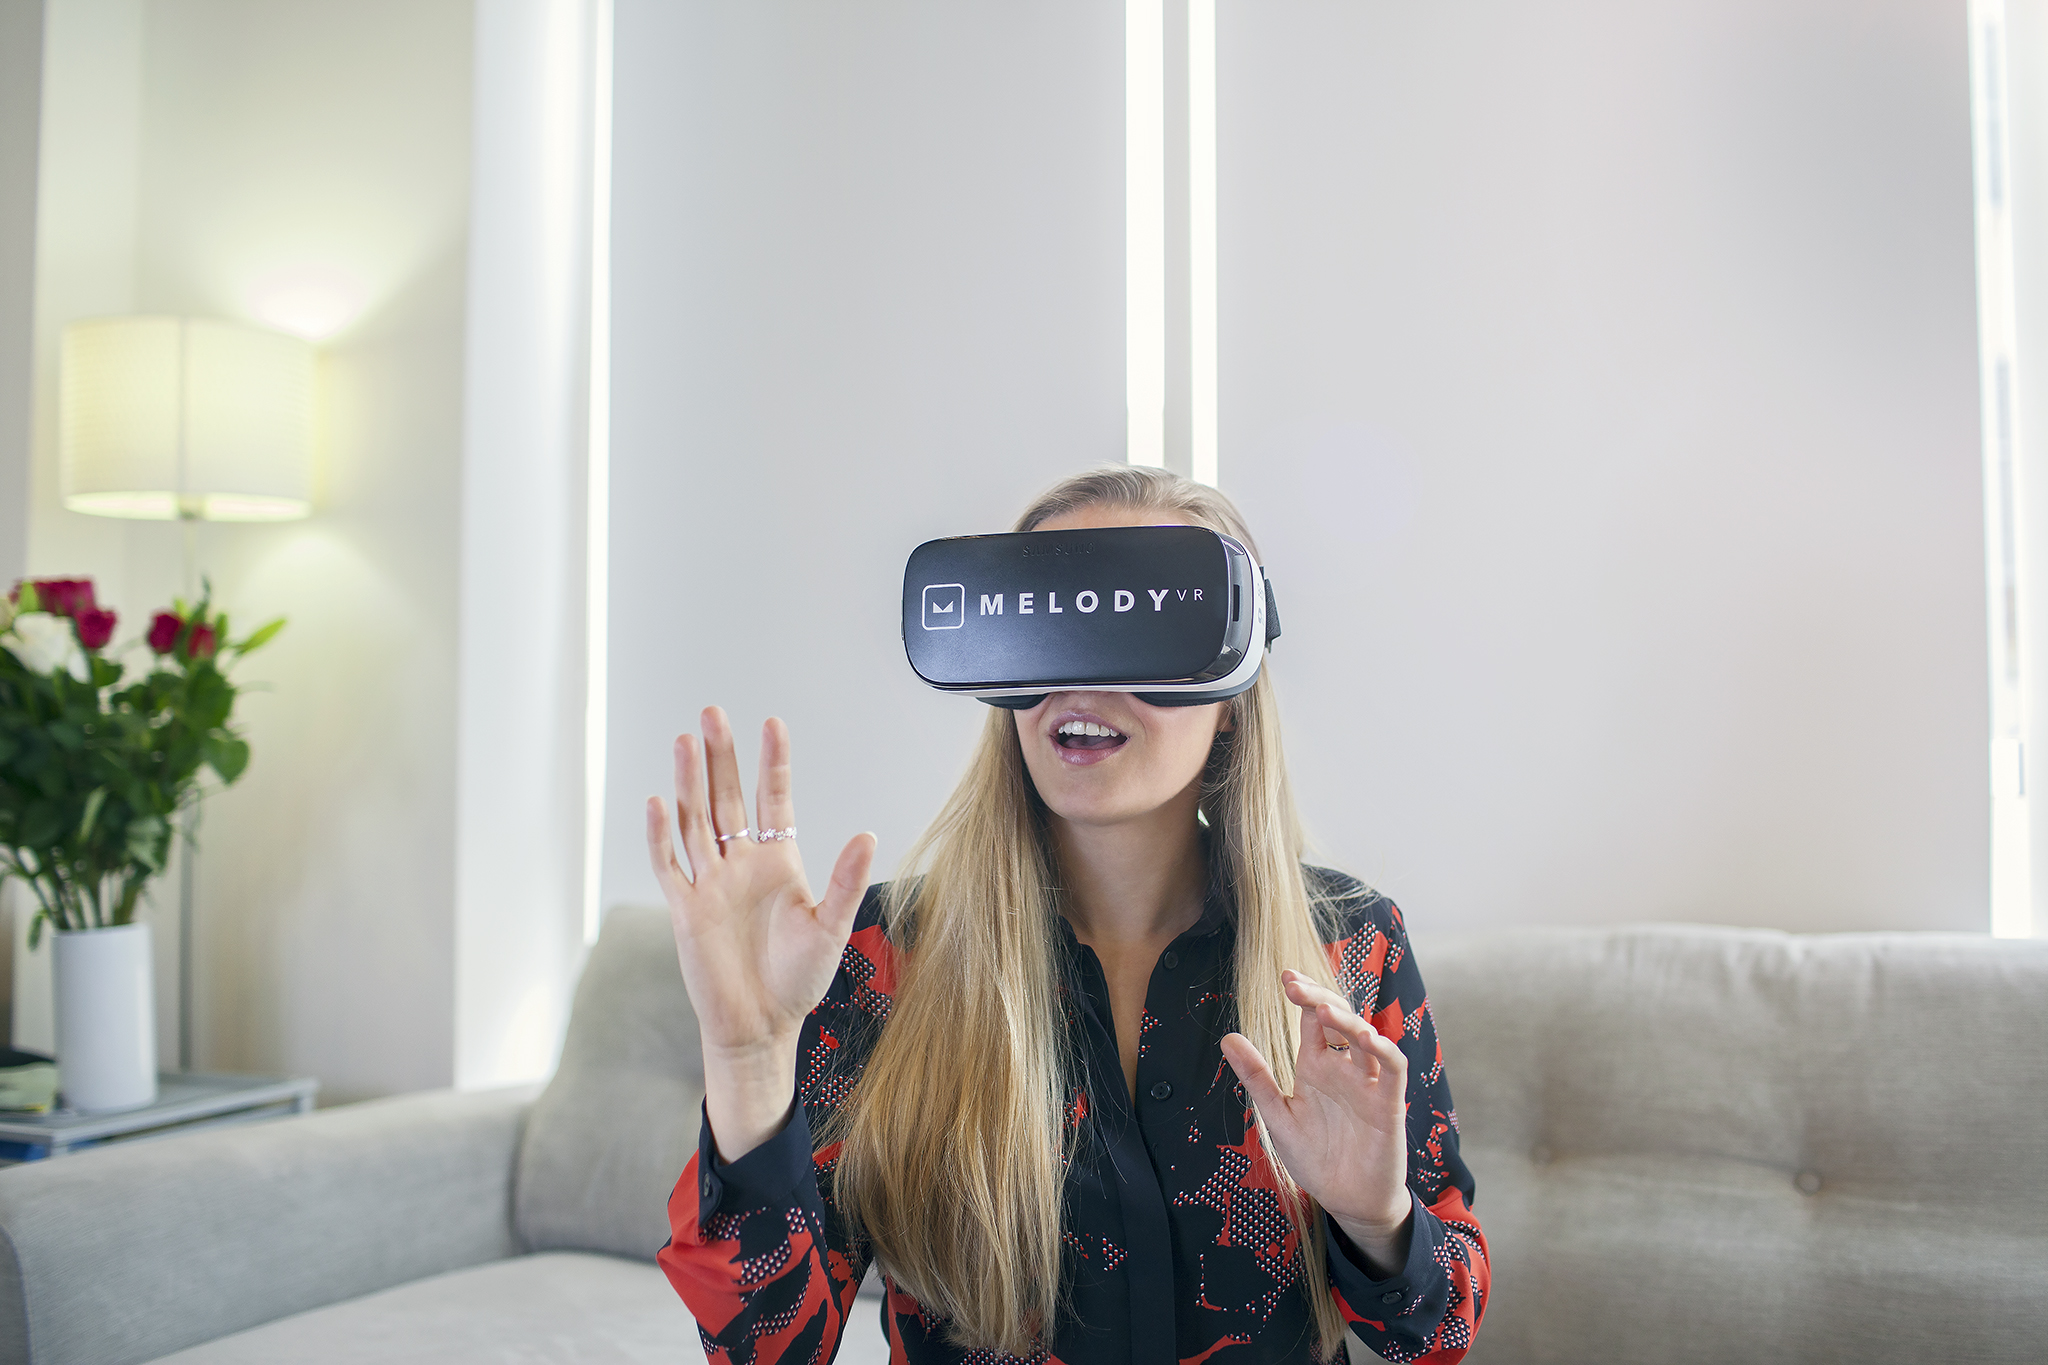 MelodyVR raise £5m to build on their virtual reality music experiences